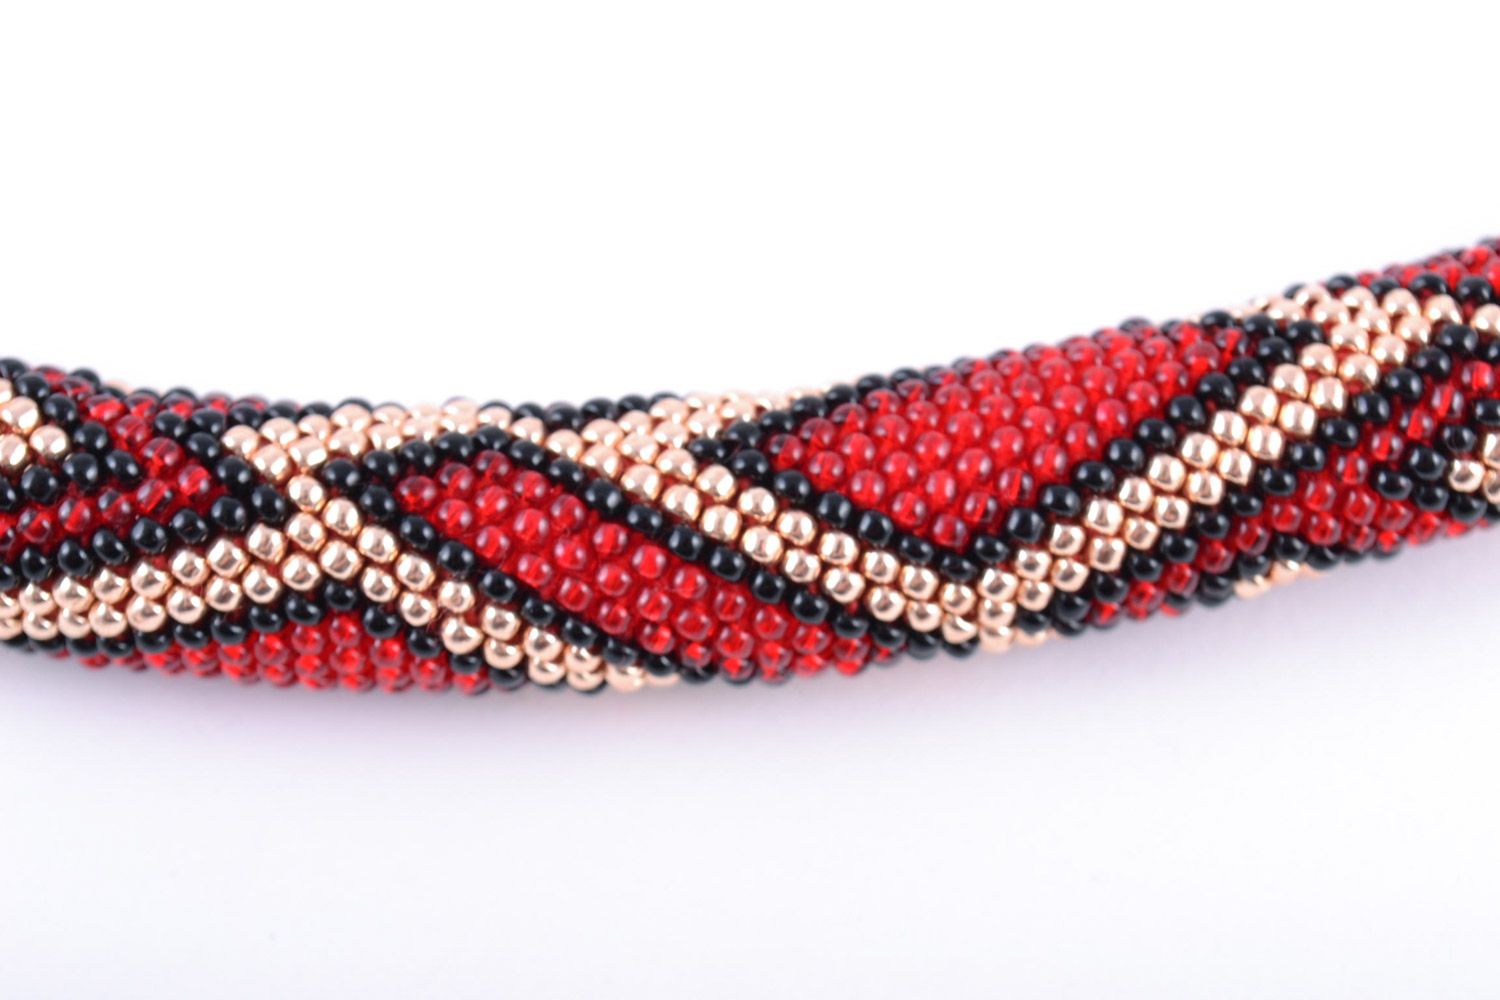 Handmade red Czech bead cord necklace with geometric patterns photo 3